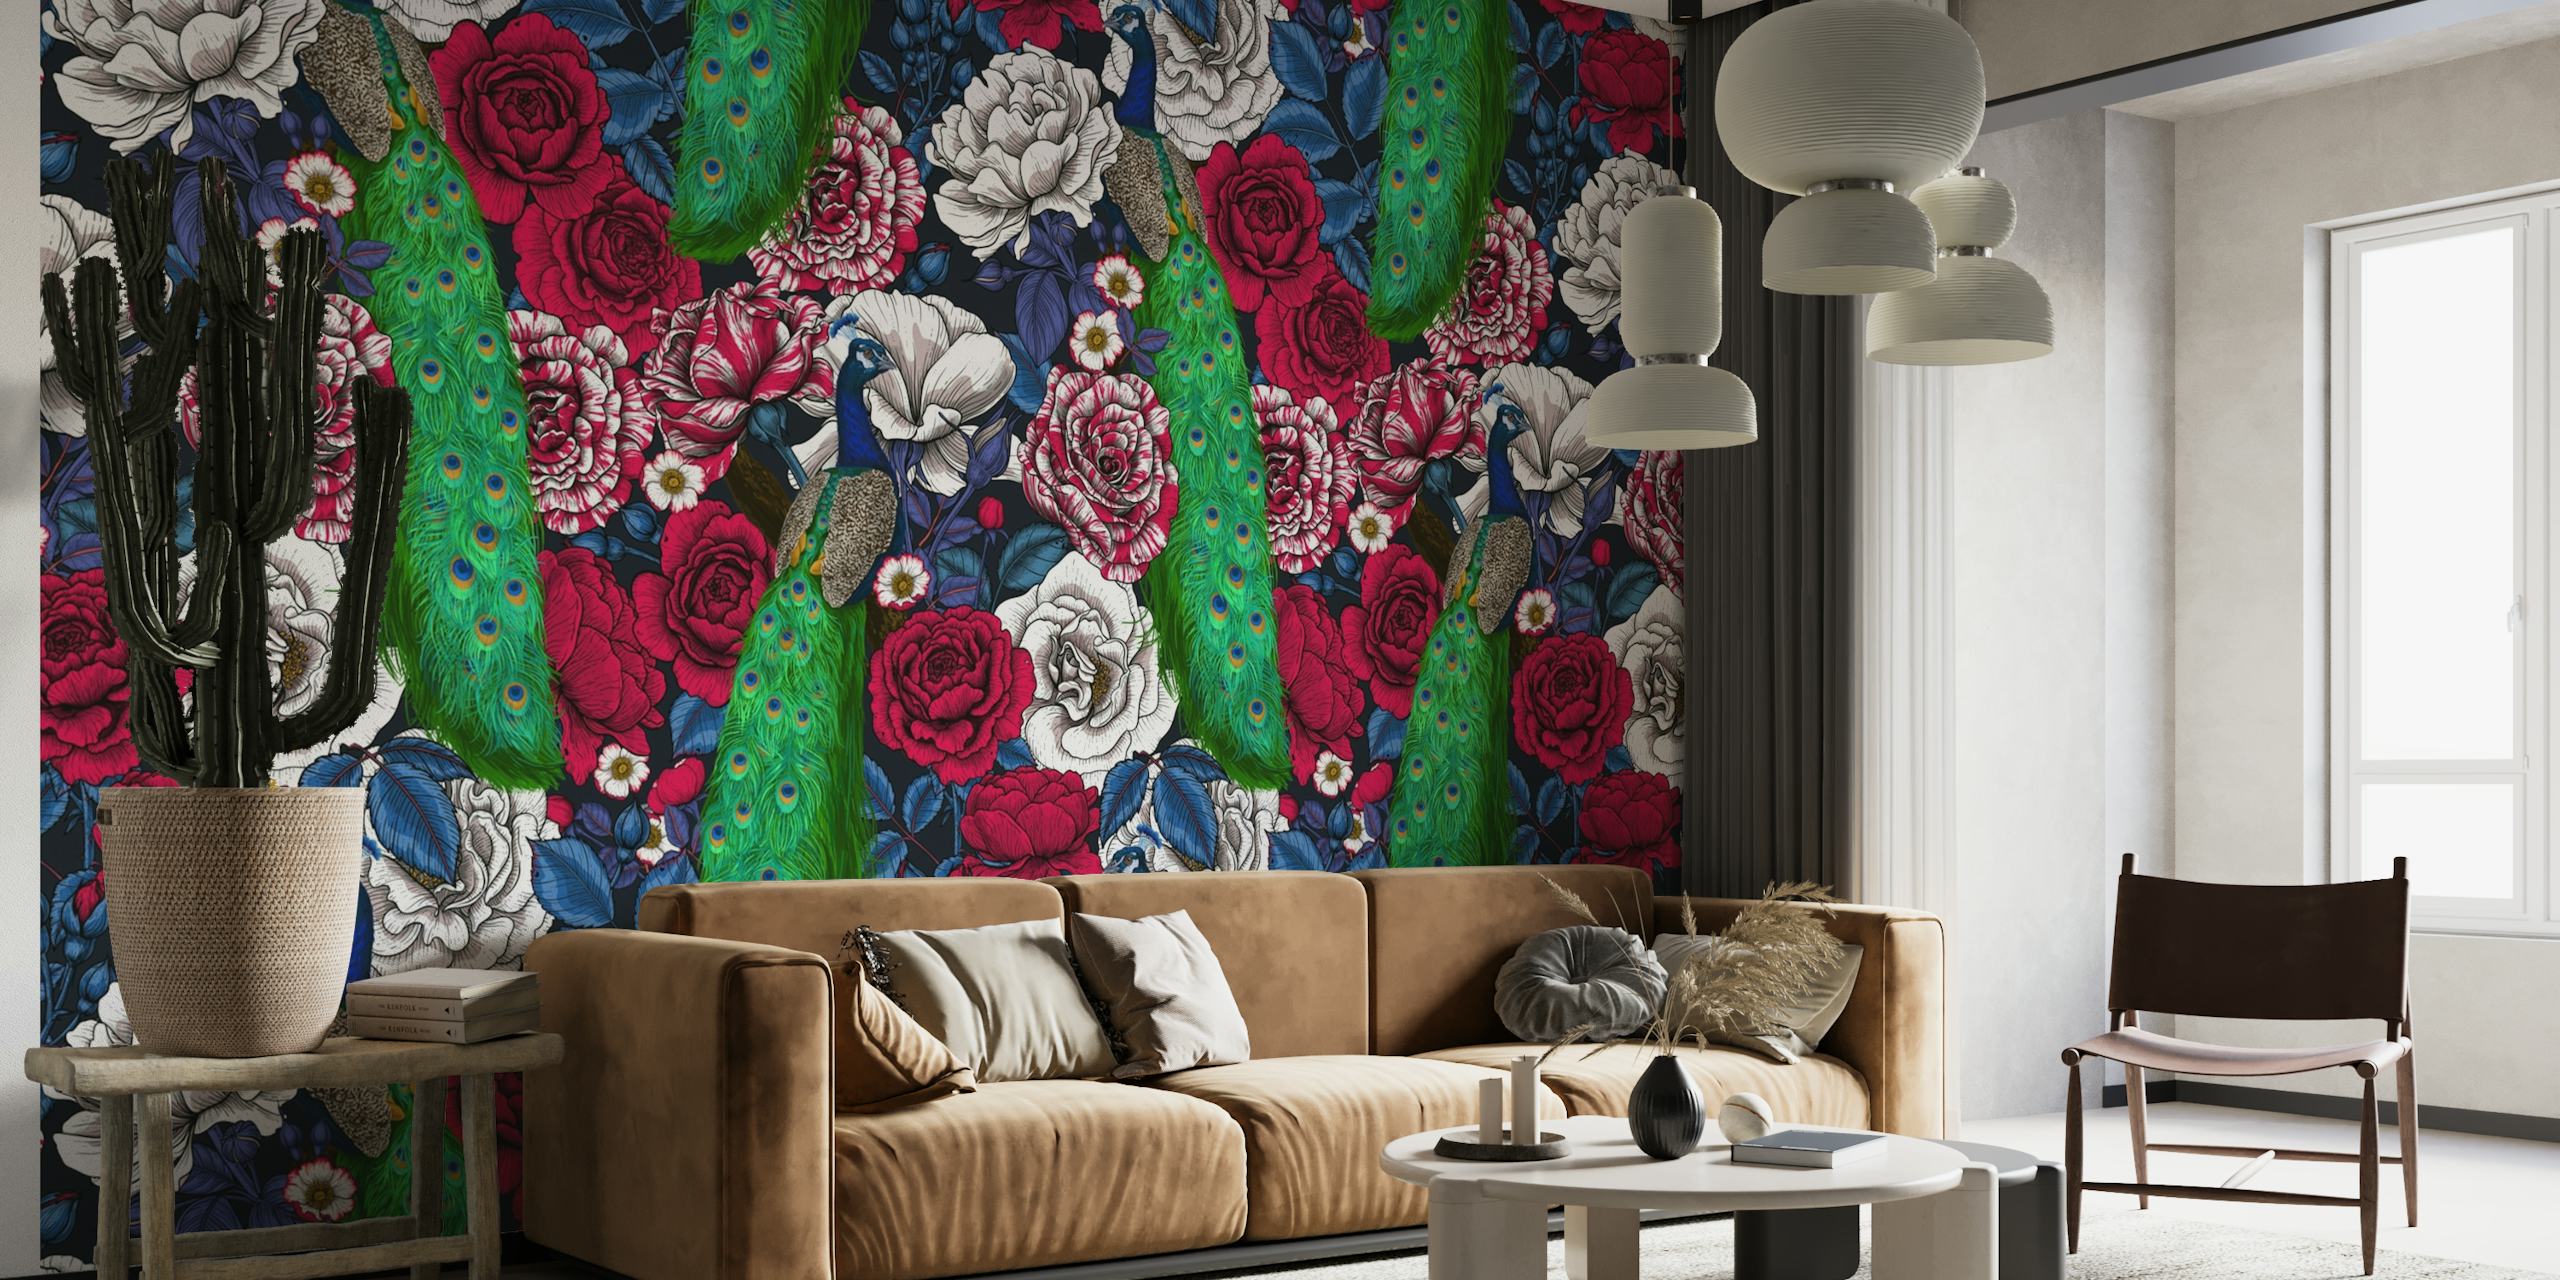 Peacock and rose pattern wall mural with vibrant blues and reds on a dark background